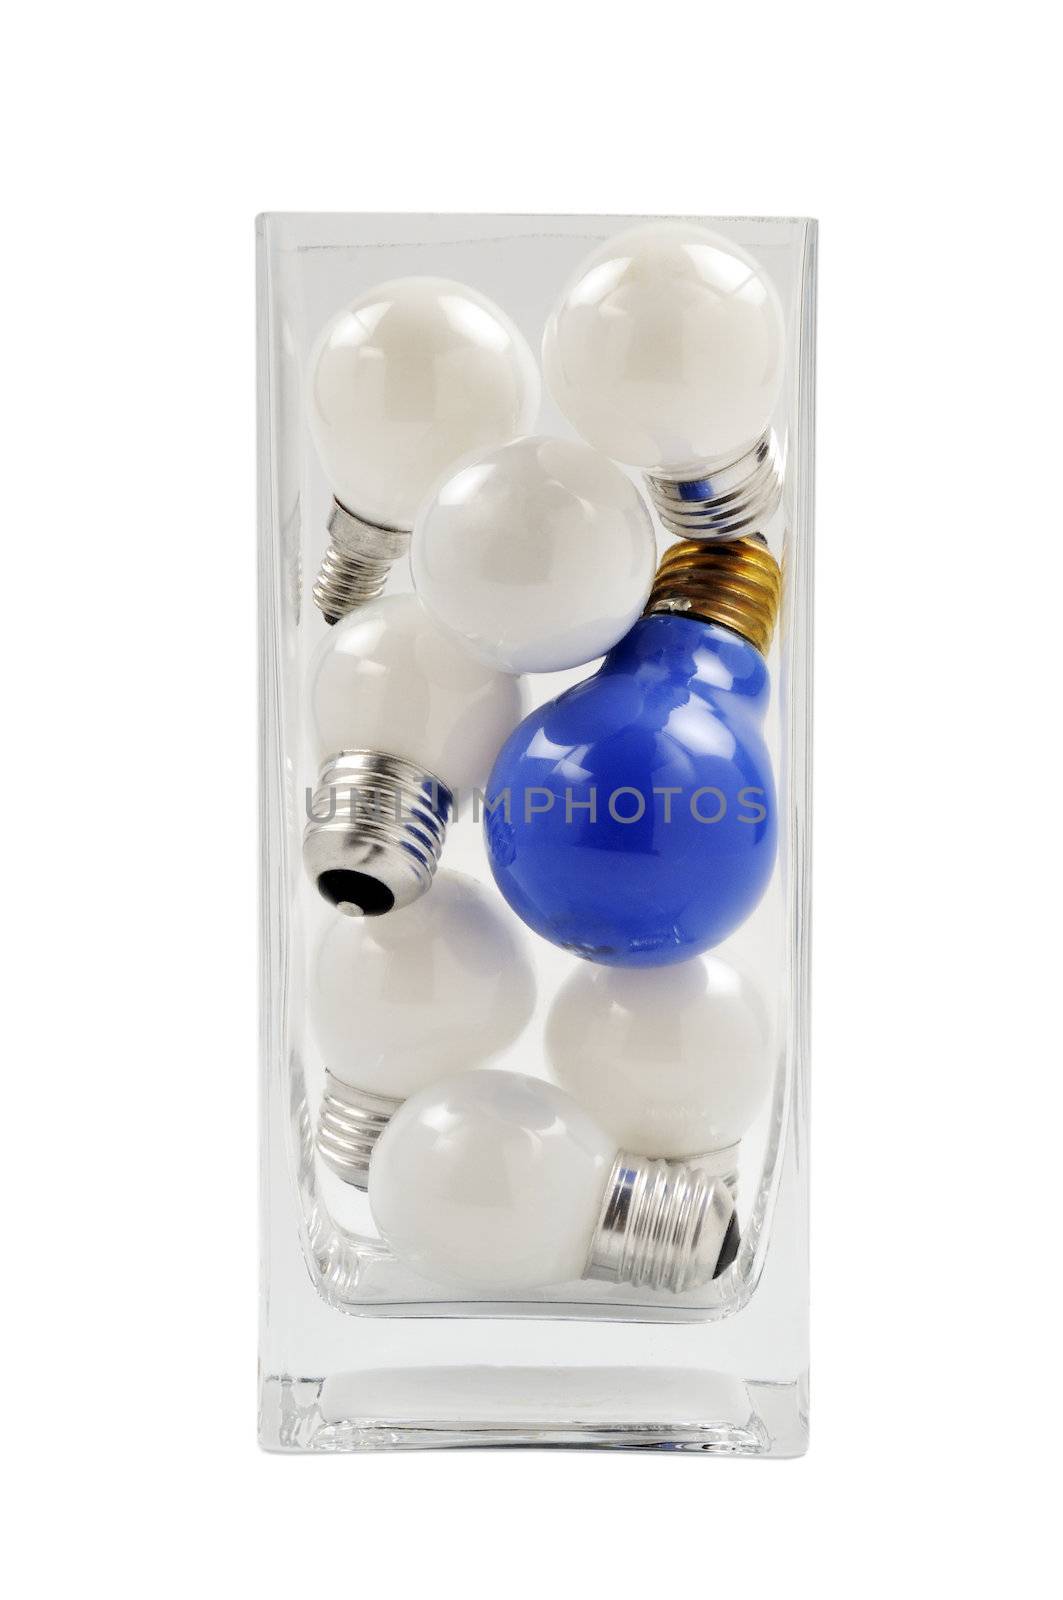 A figurative picture of light bulbs in a glass pot. One blue bulb with white lamps. One bright mind/idea in a crowd.